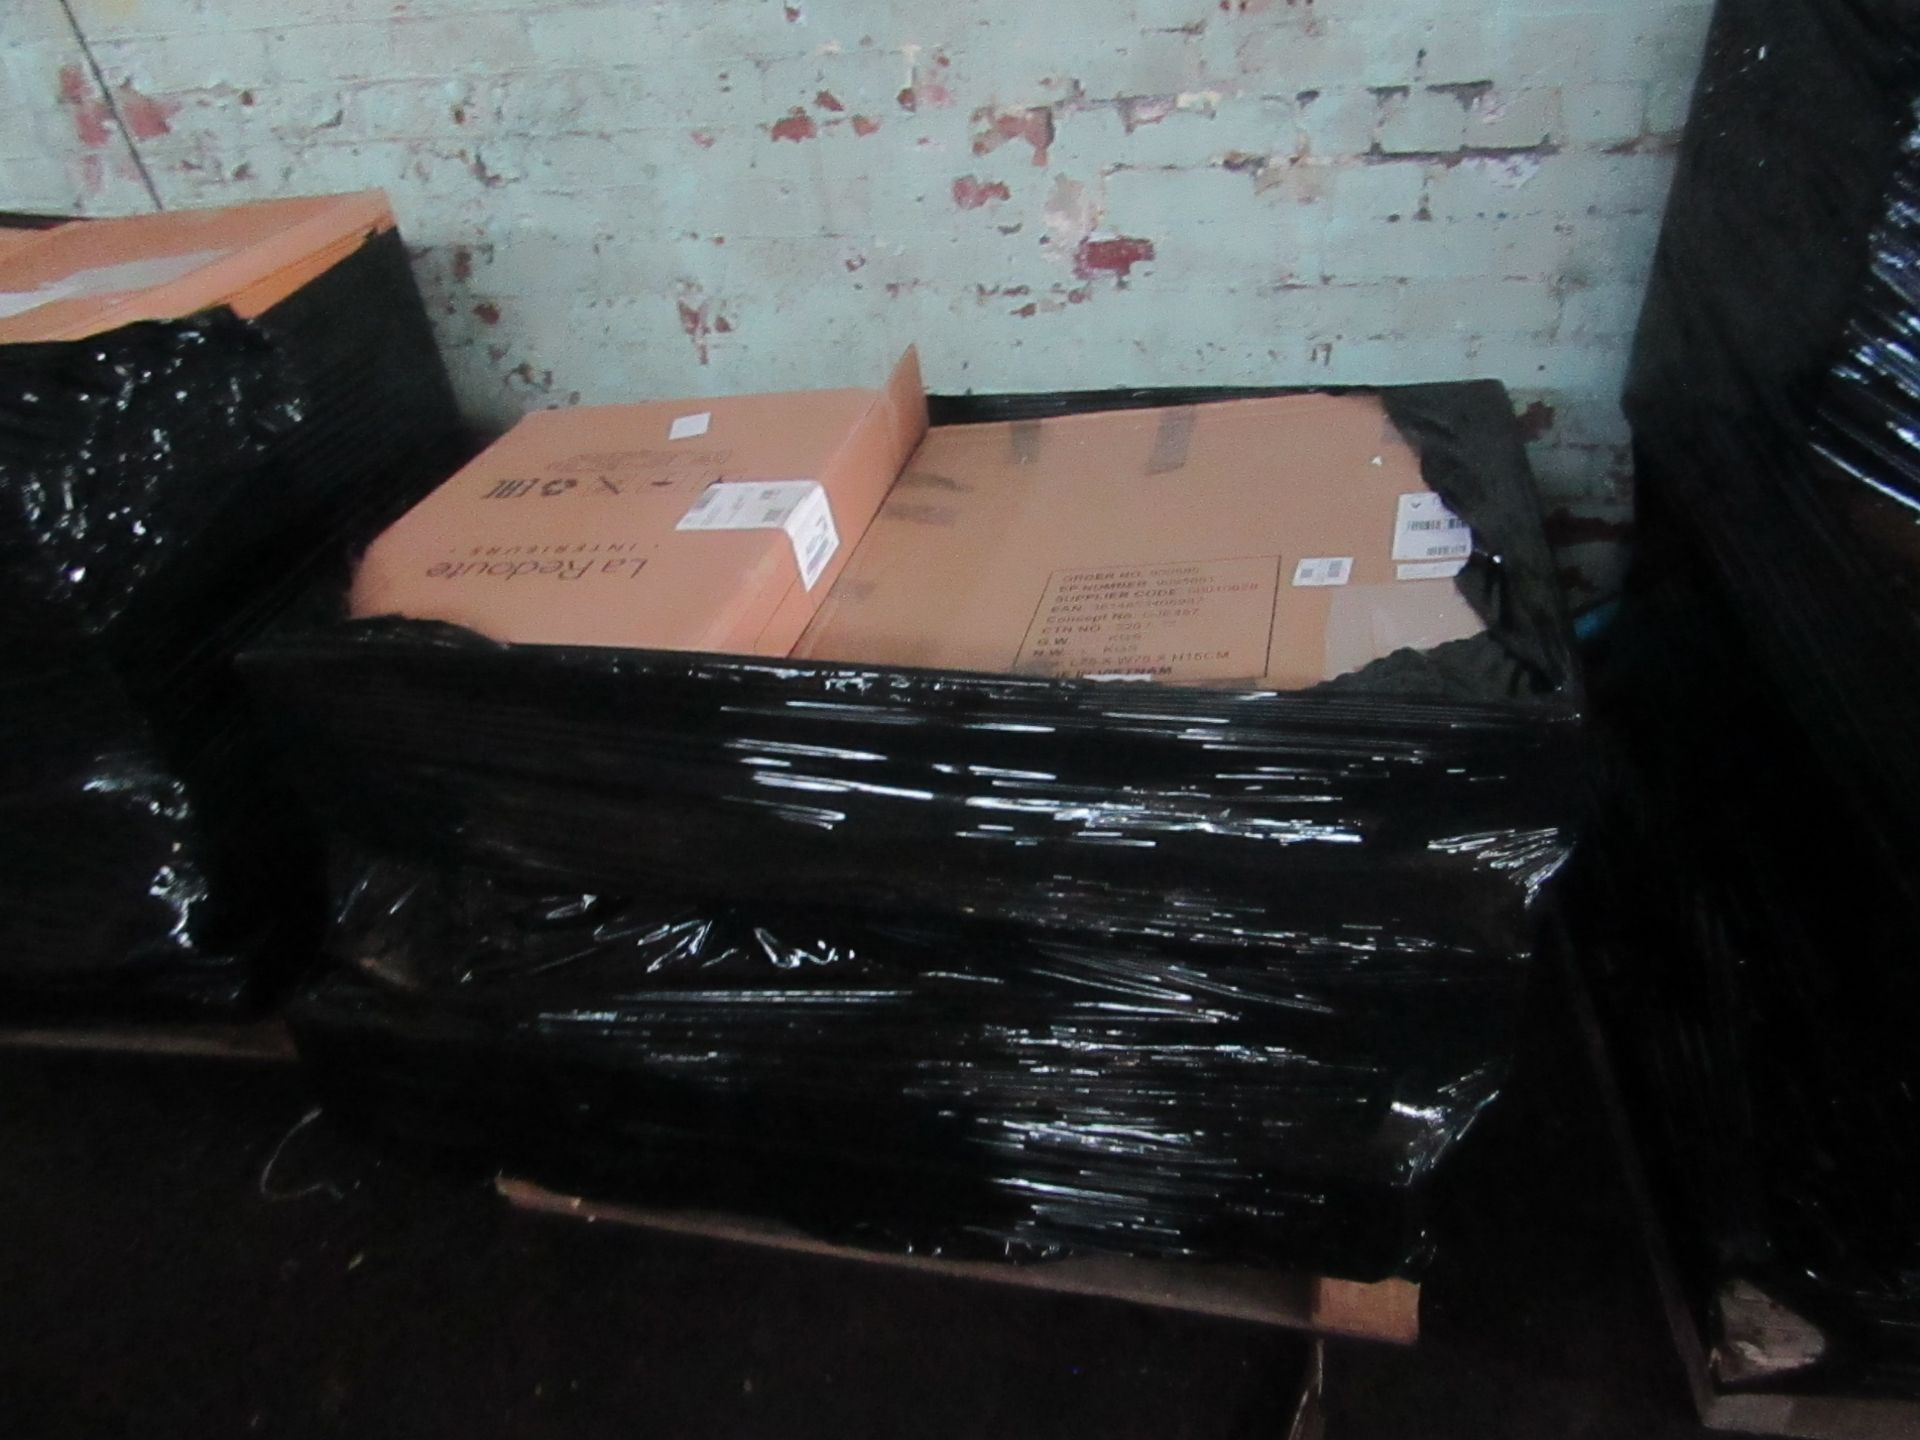 | 1X | PALLET OF FAULTY / MISSING PARTS / DAMAGED CUSTOMER RETURNS FROM LA REDOUTE UNMANIFESTED |